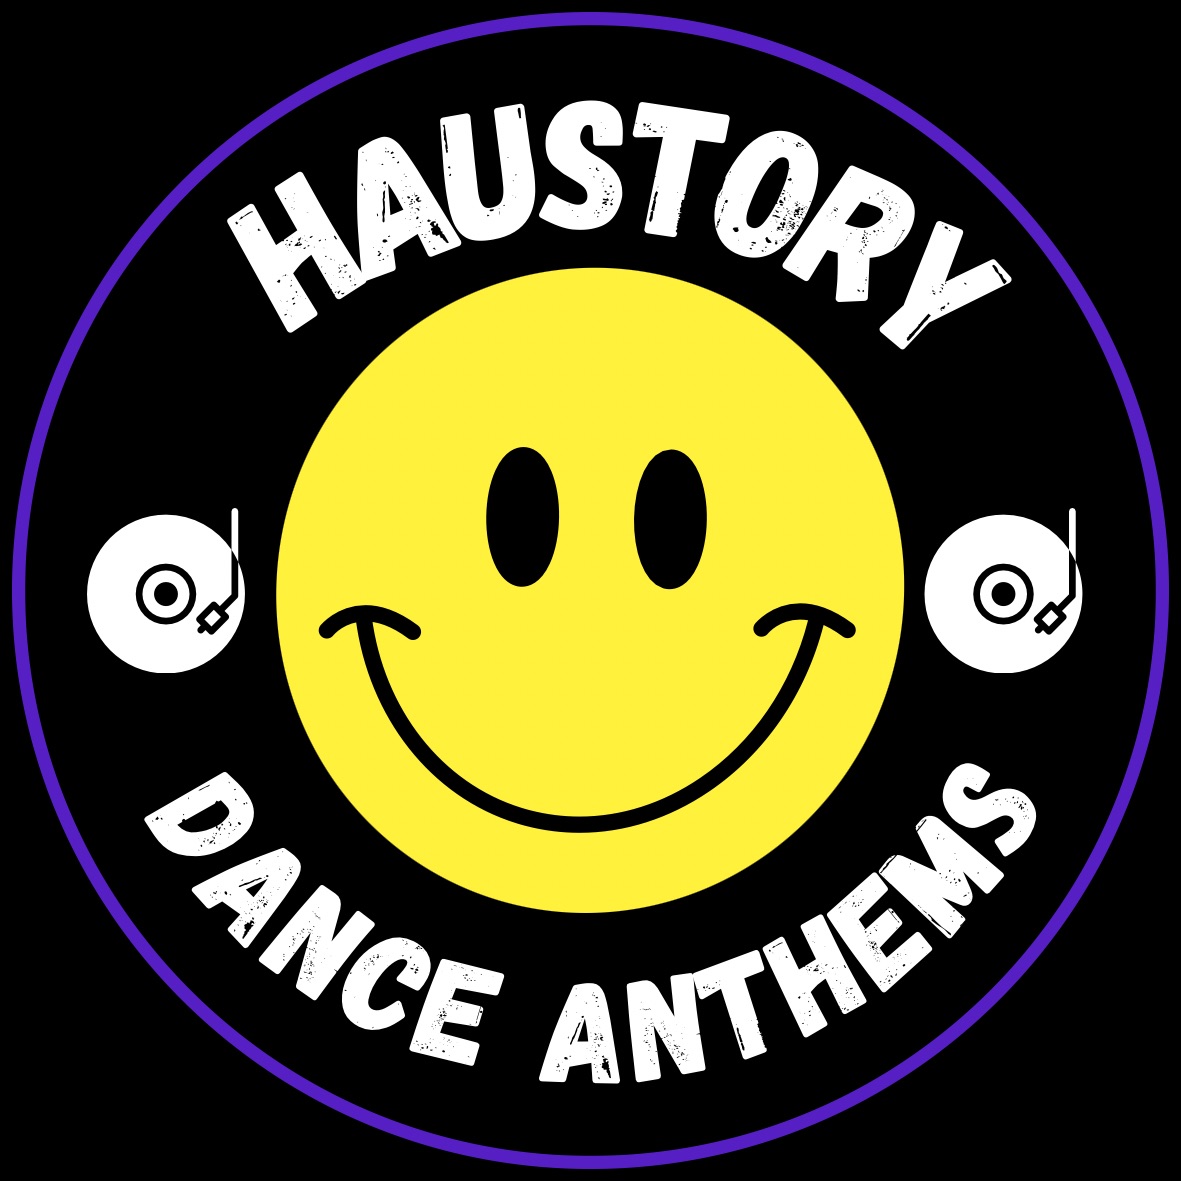 Andy Sutton ~ House Story Dance Anthems